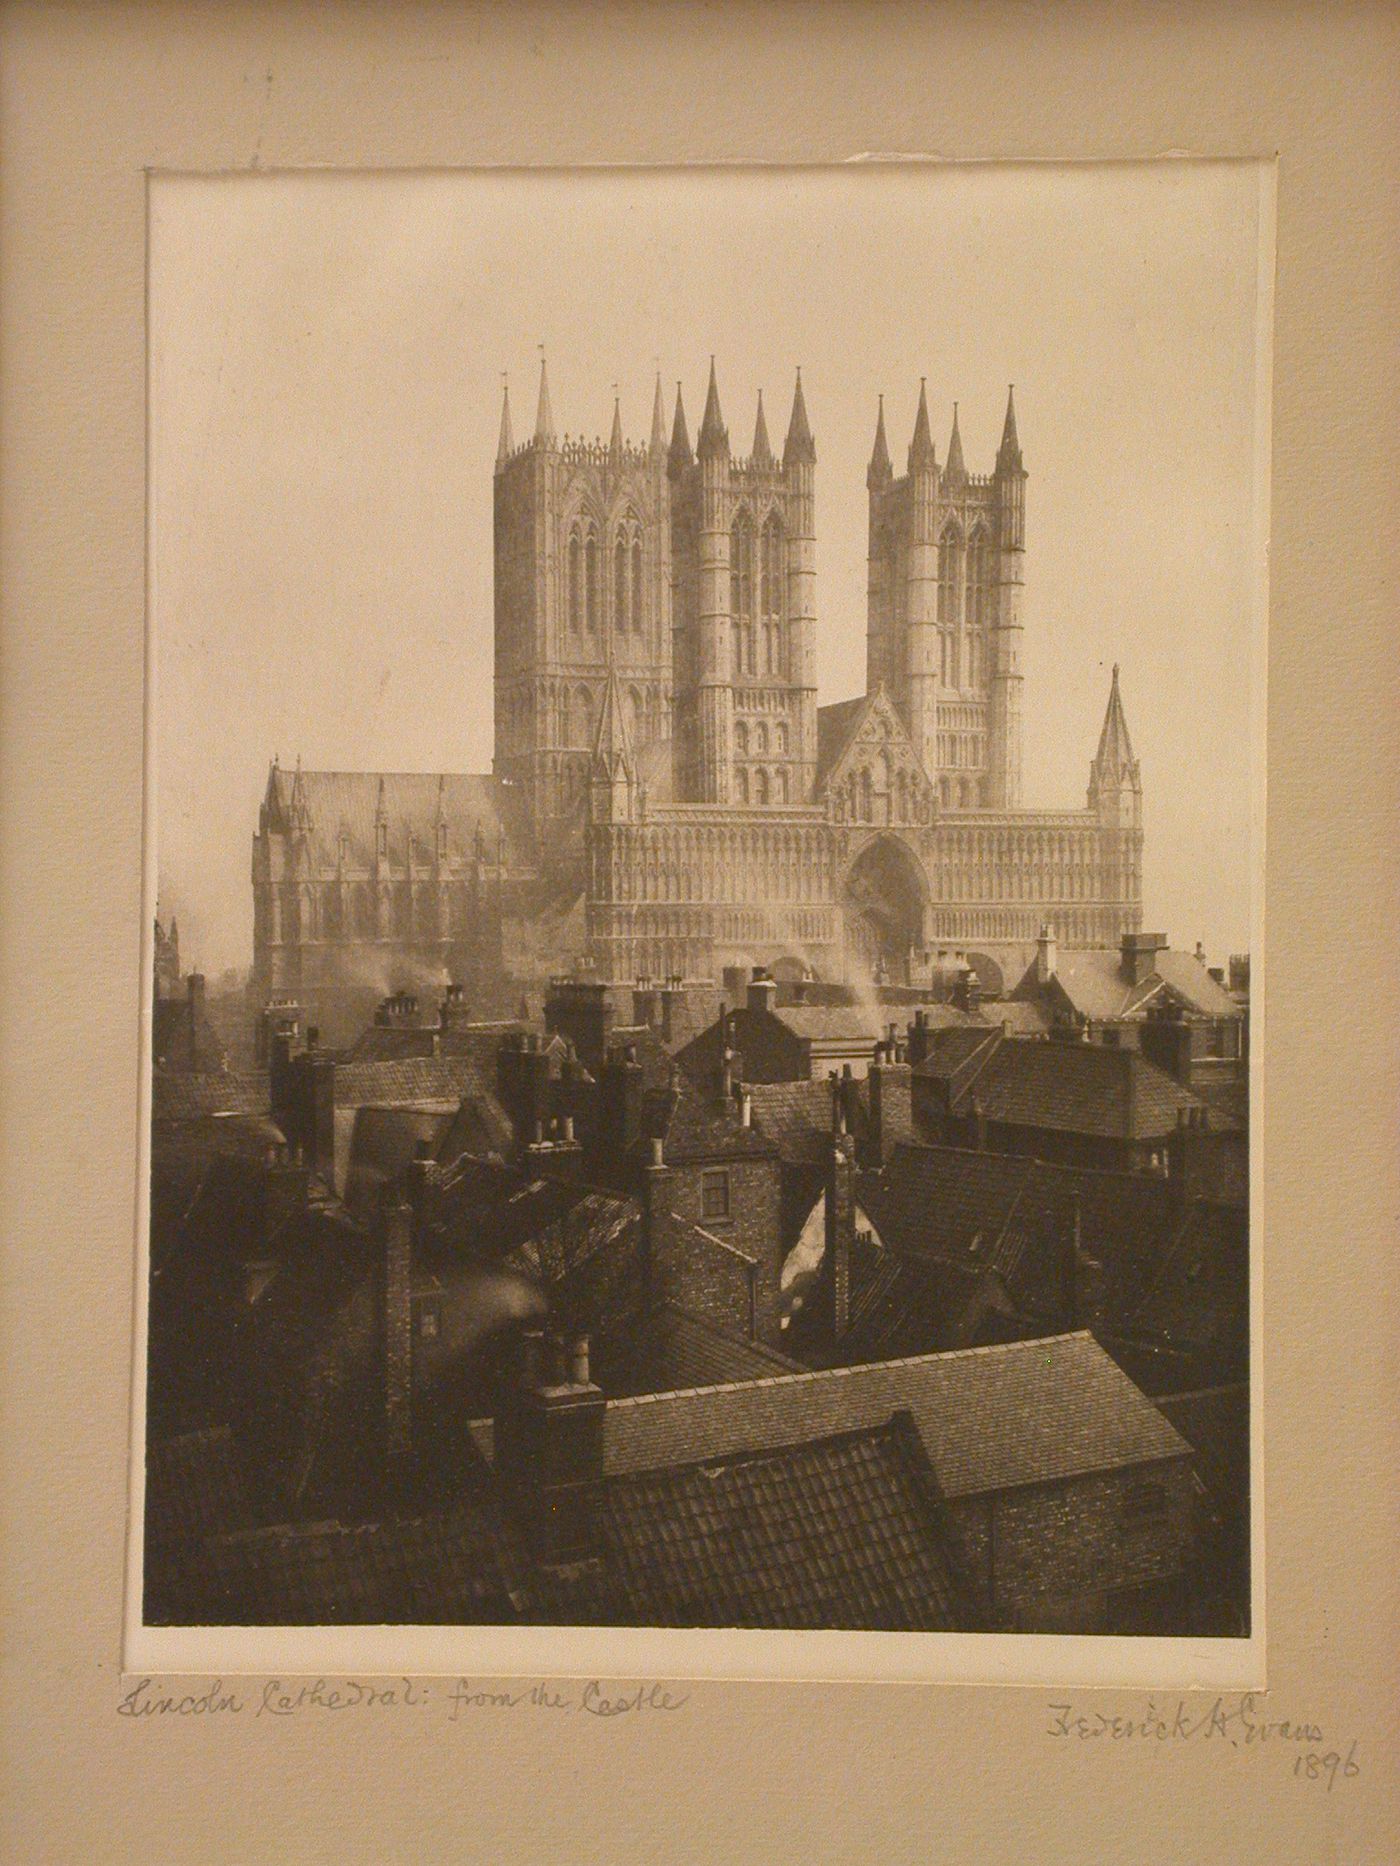 Lincoln Cathedral: from the Castle